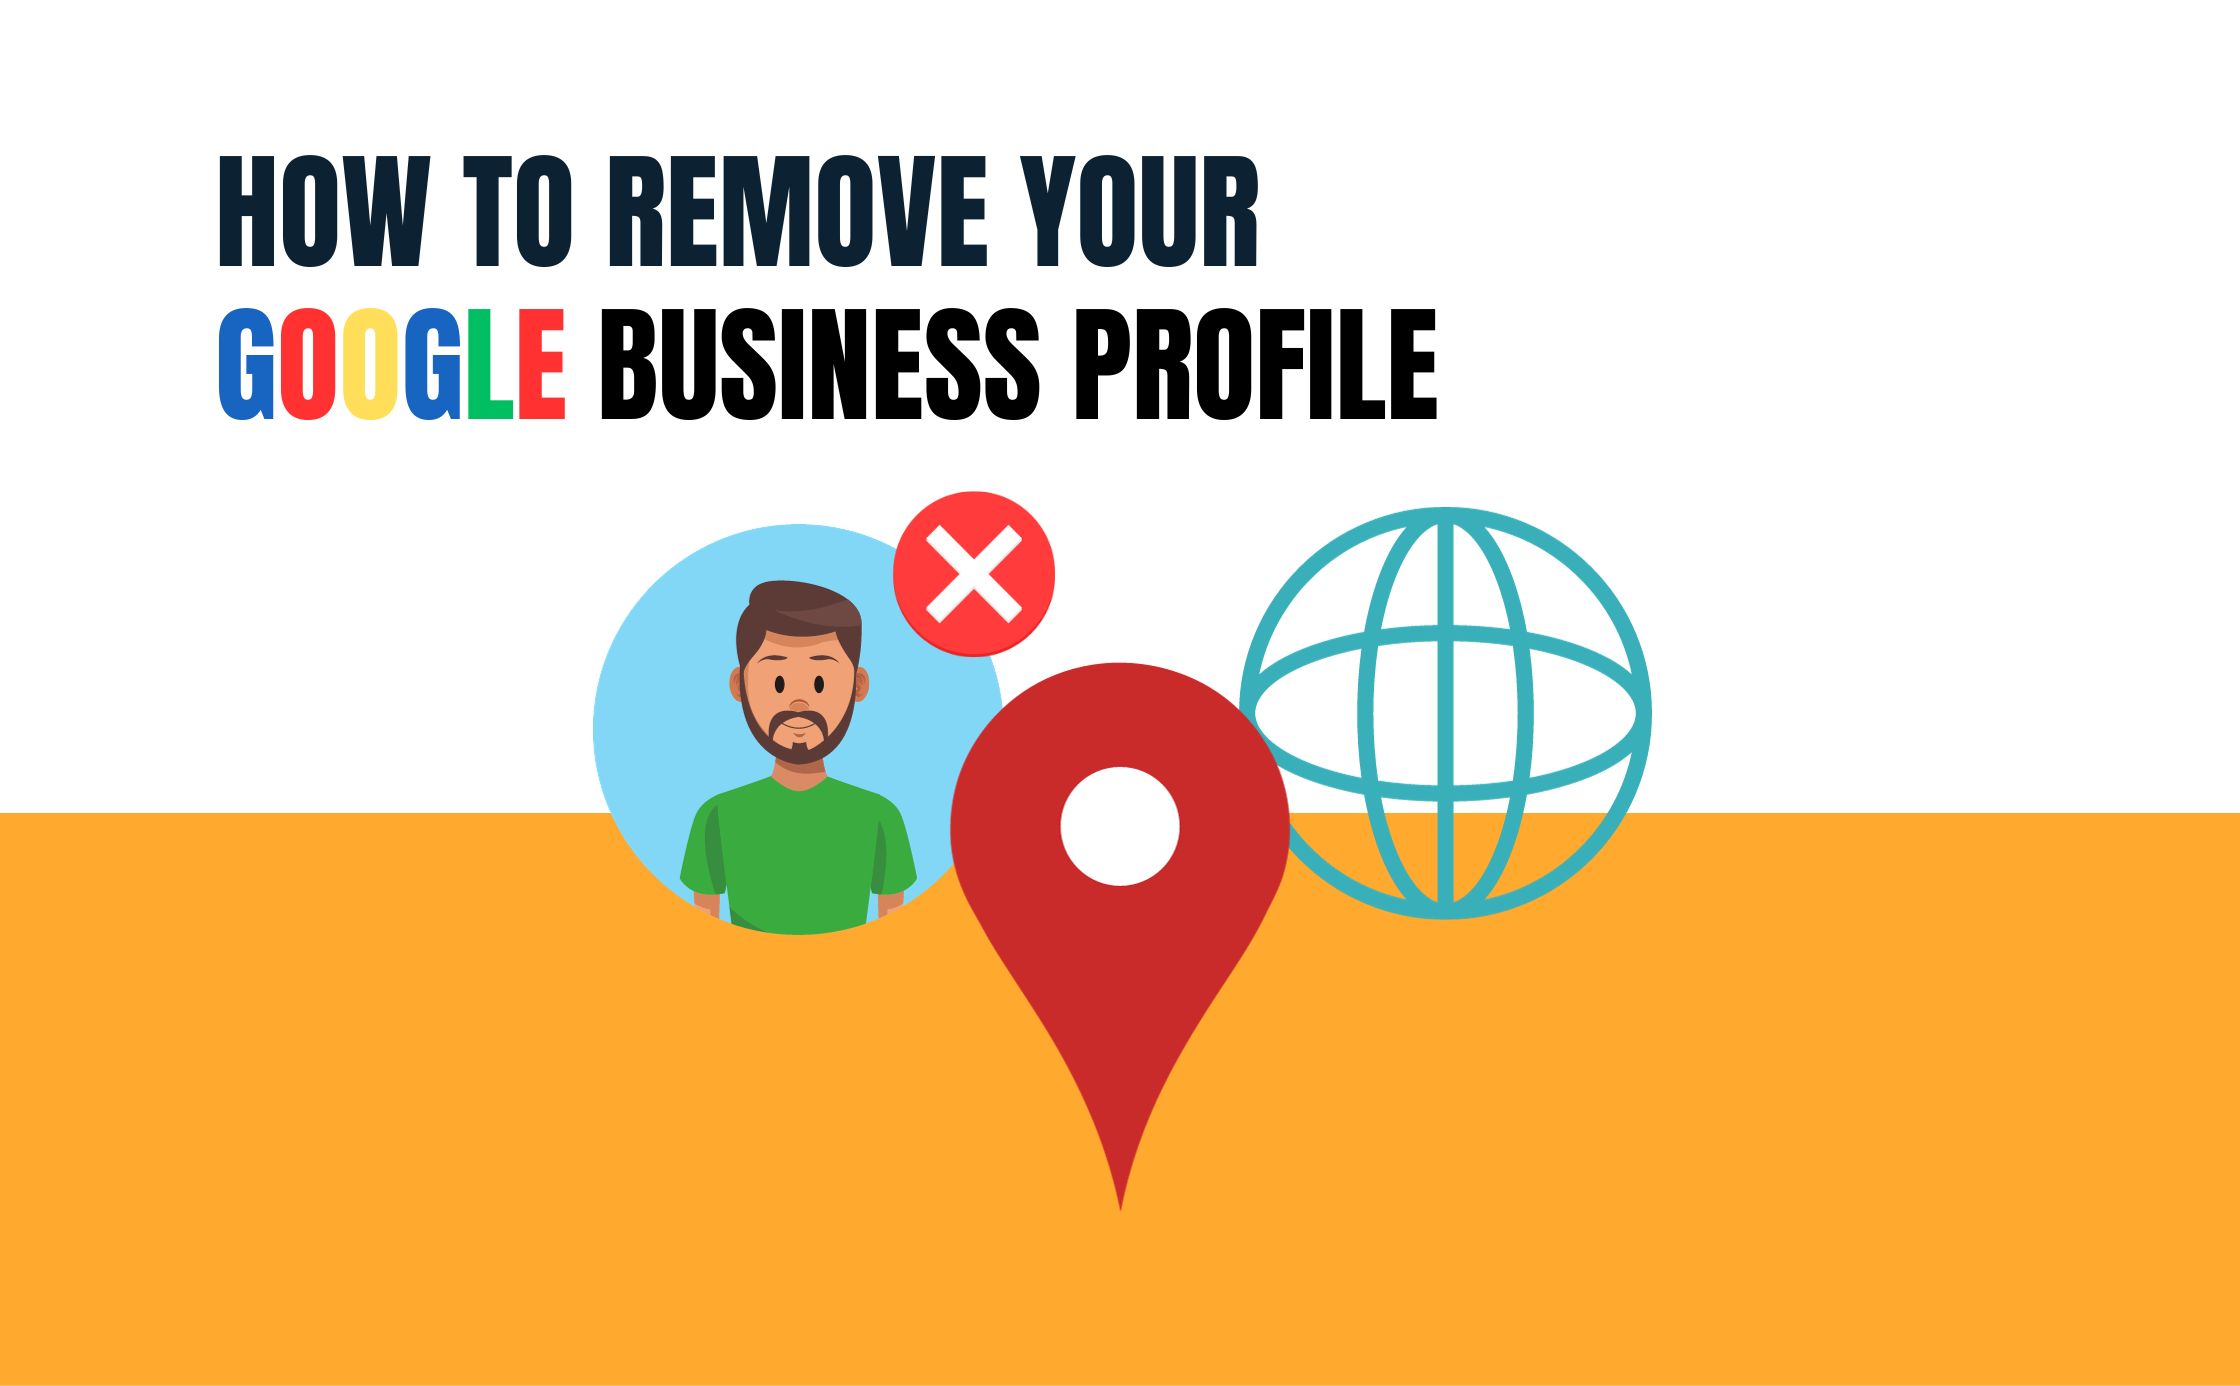 Guide on How to Delete Your Google Business Profile